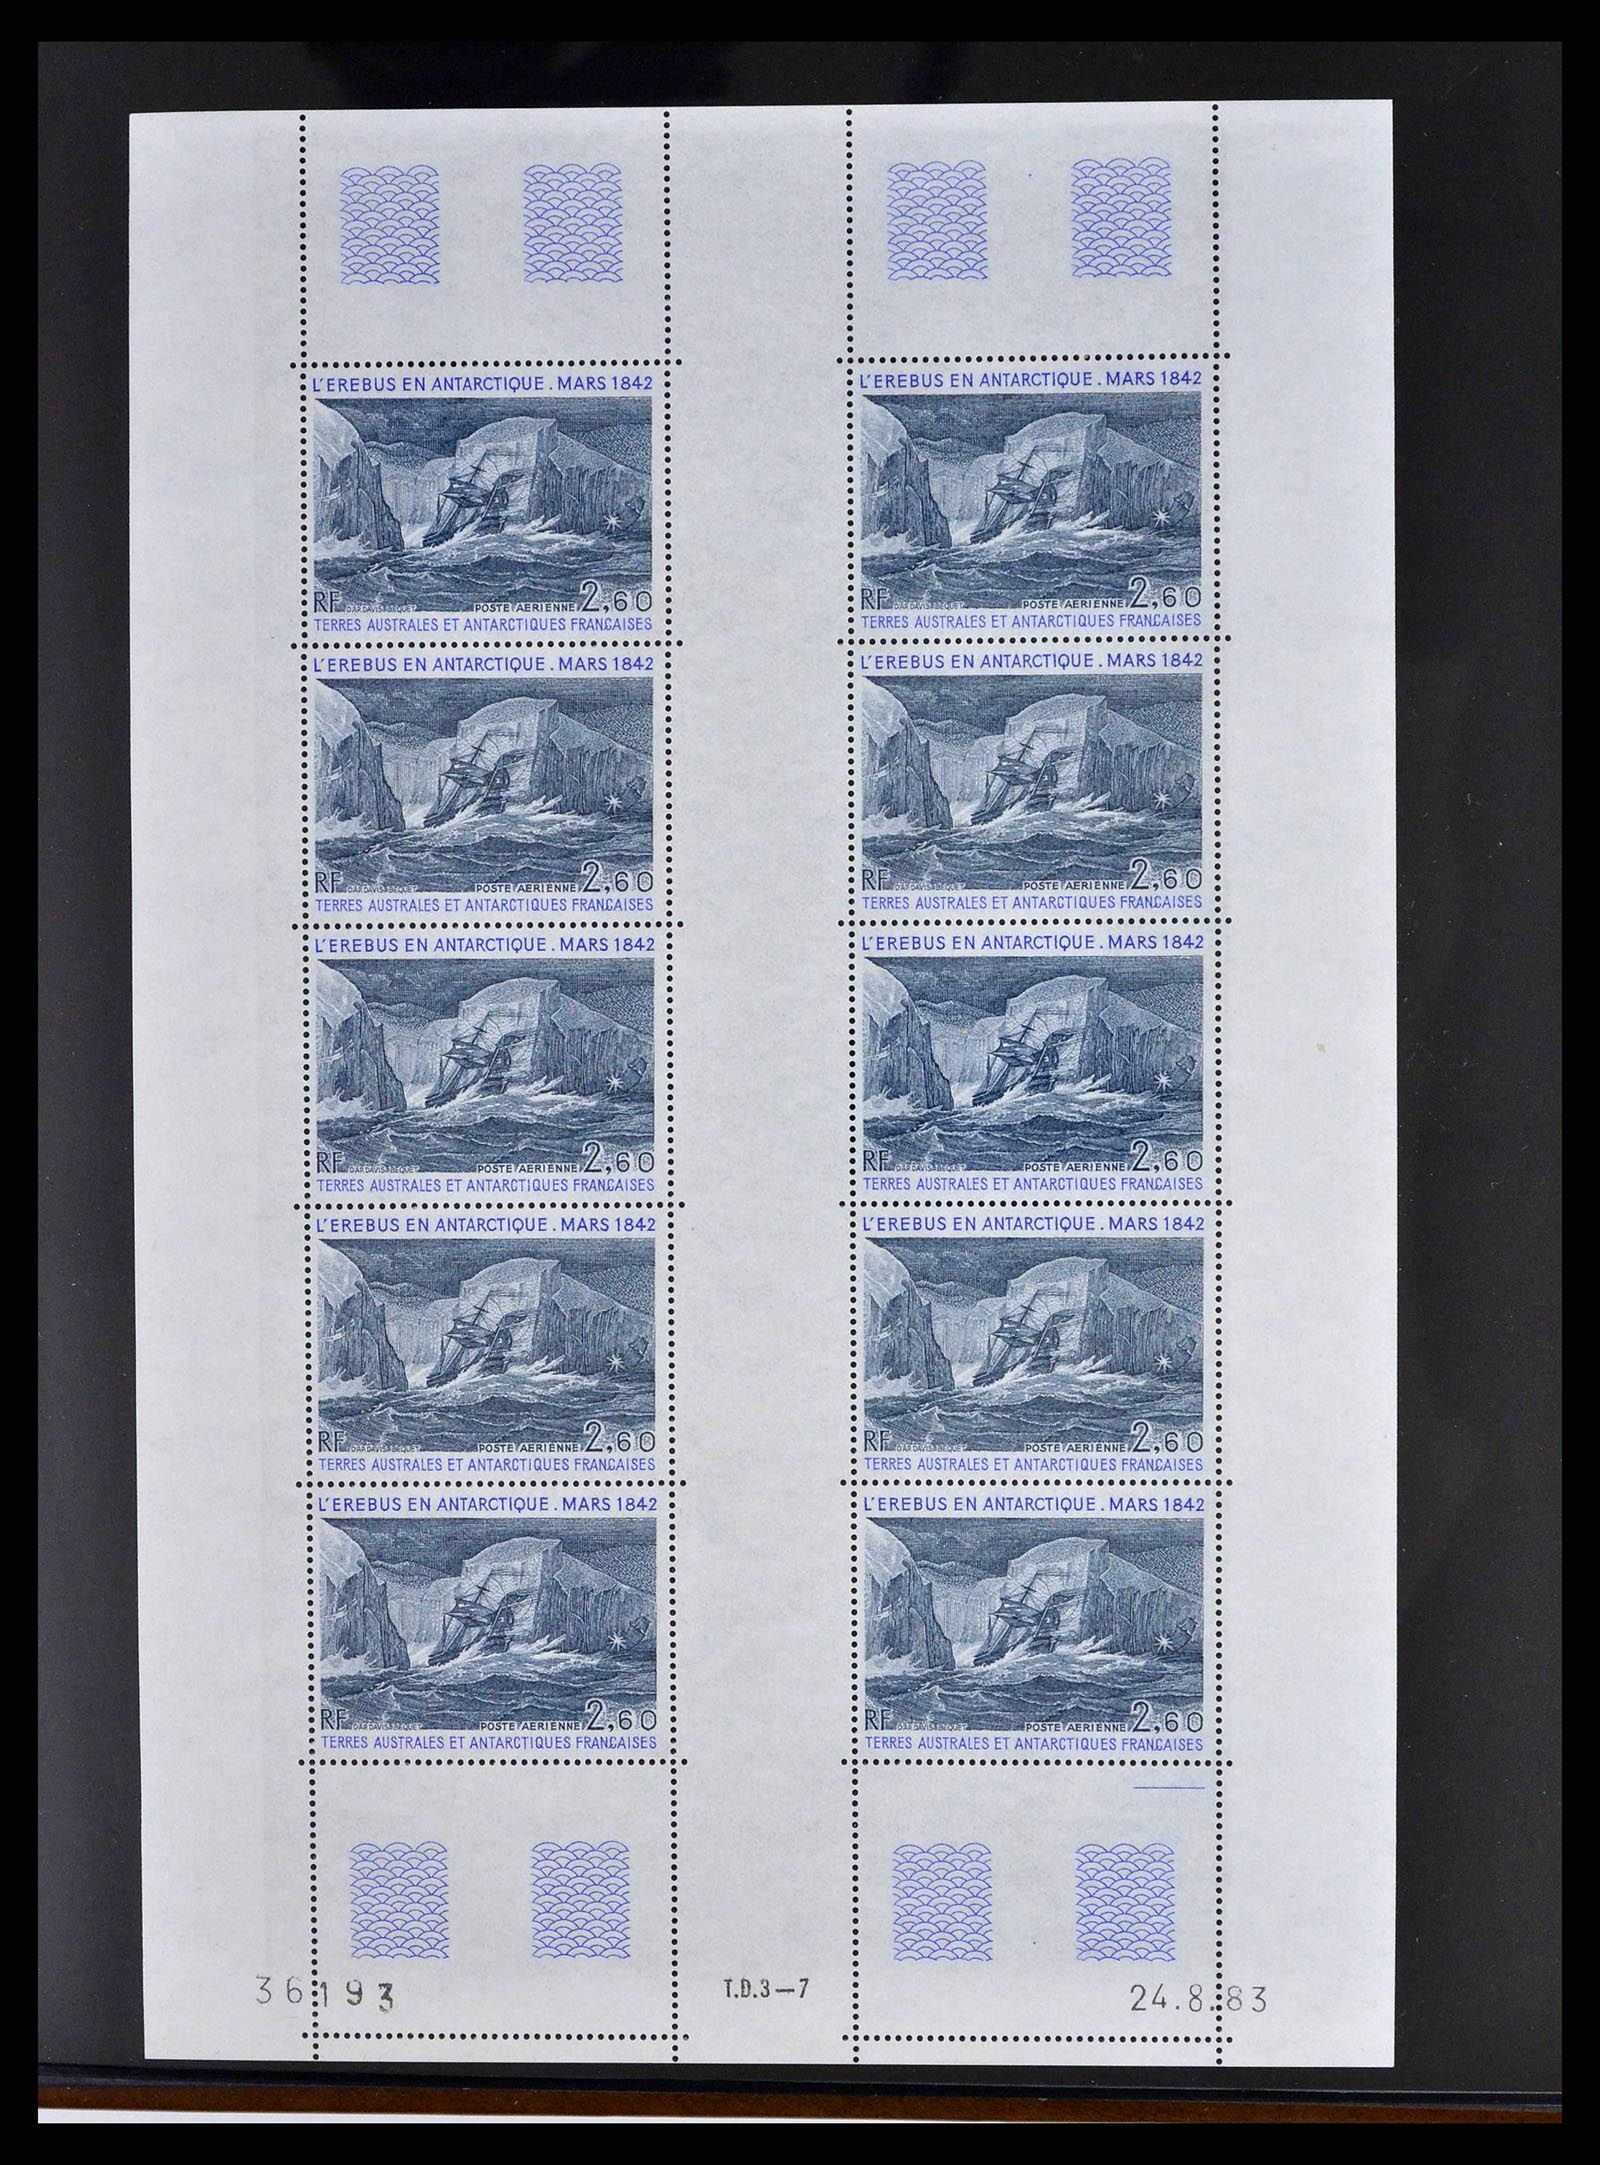 38854 0009 - Stamp collection 38854 French Antarctics 1981-1995.